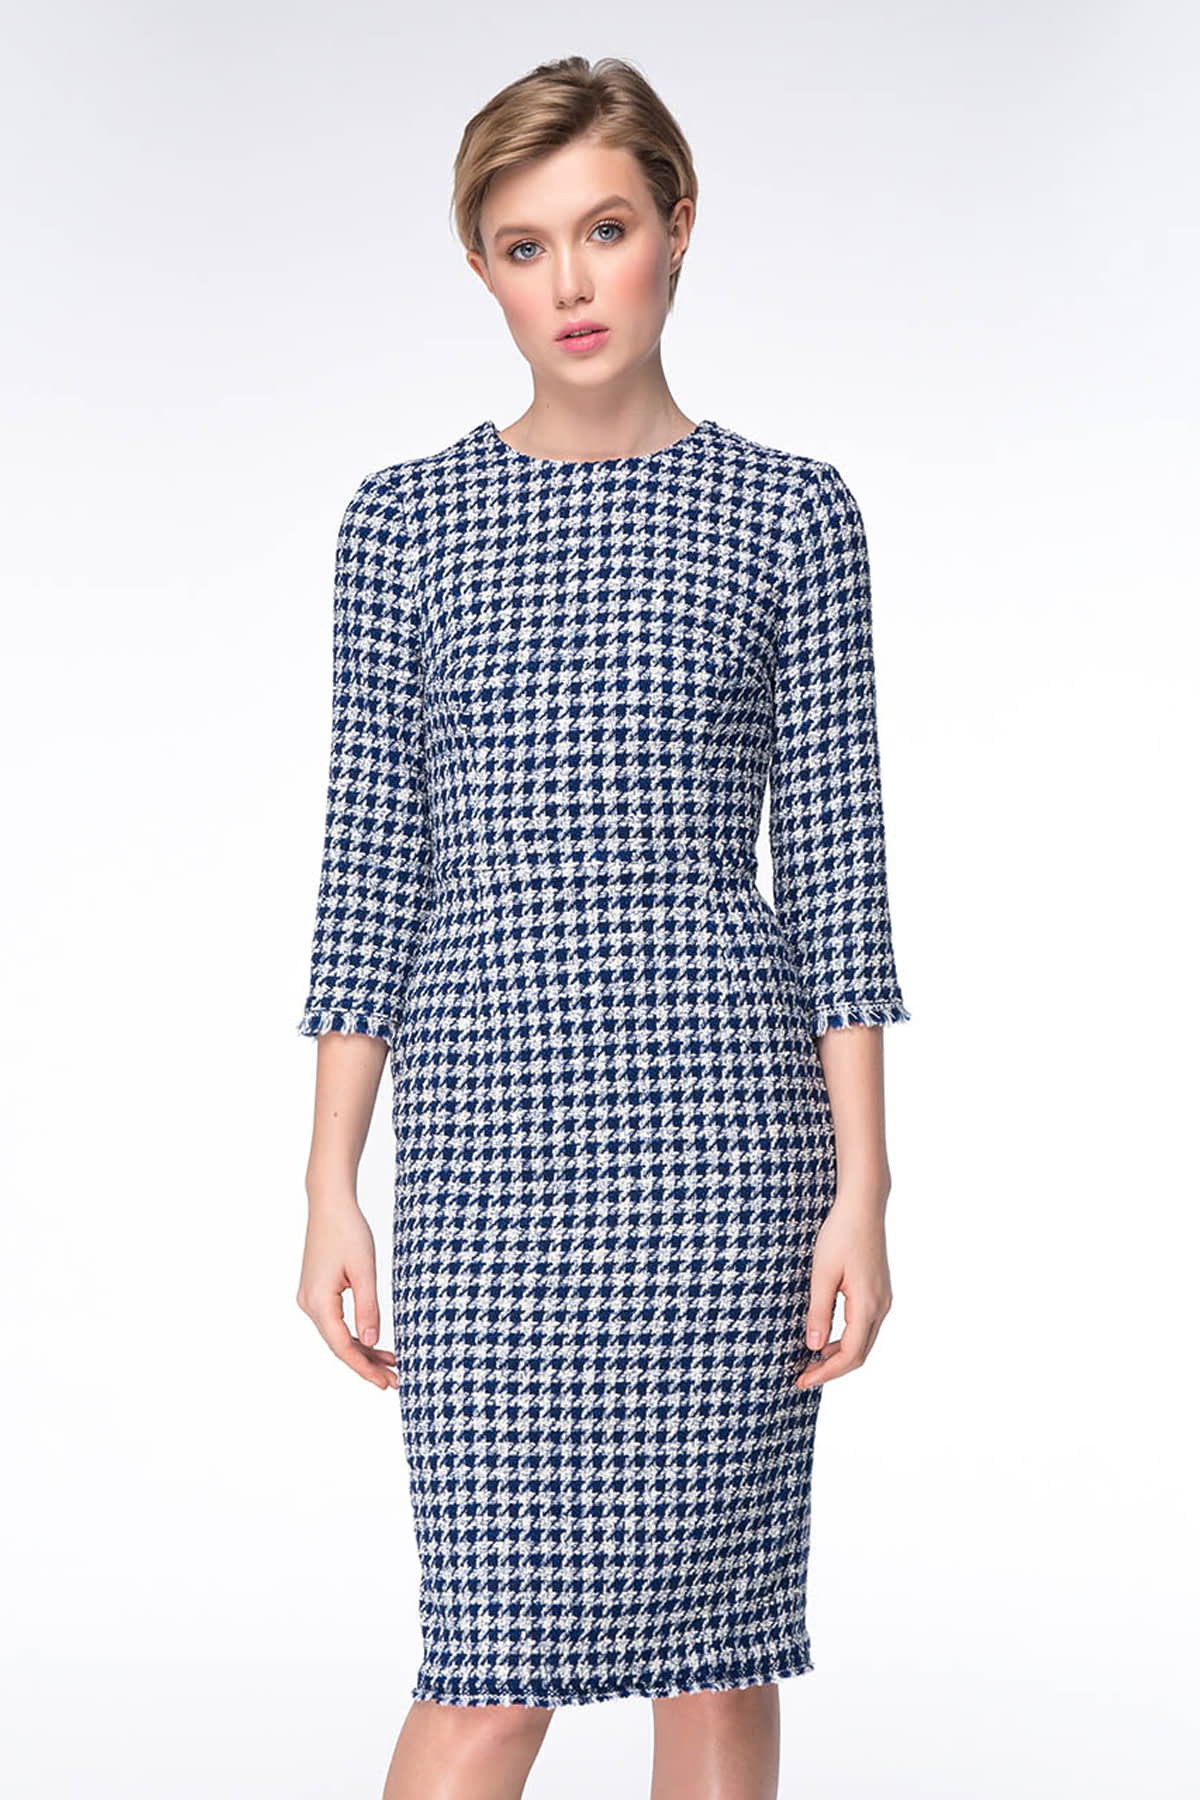 Column dress with blue&white houndstooth print, photo 7